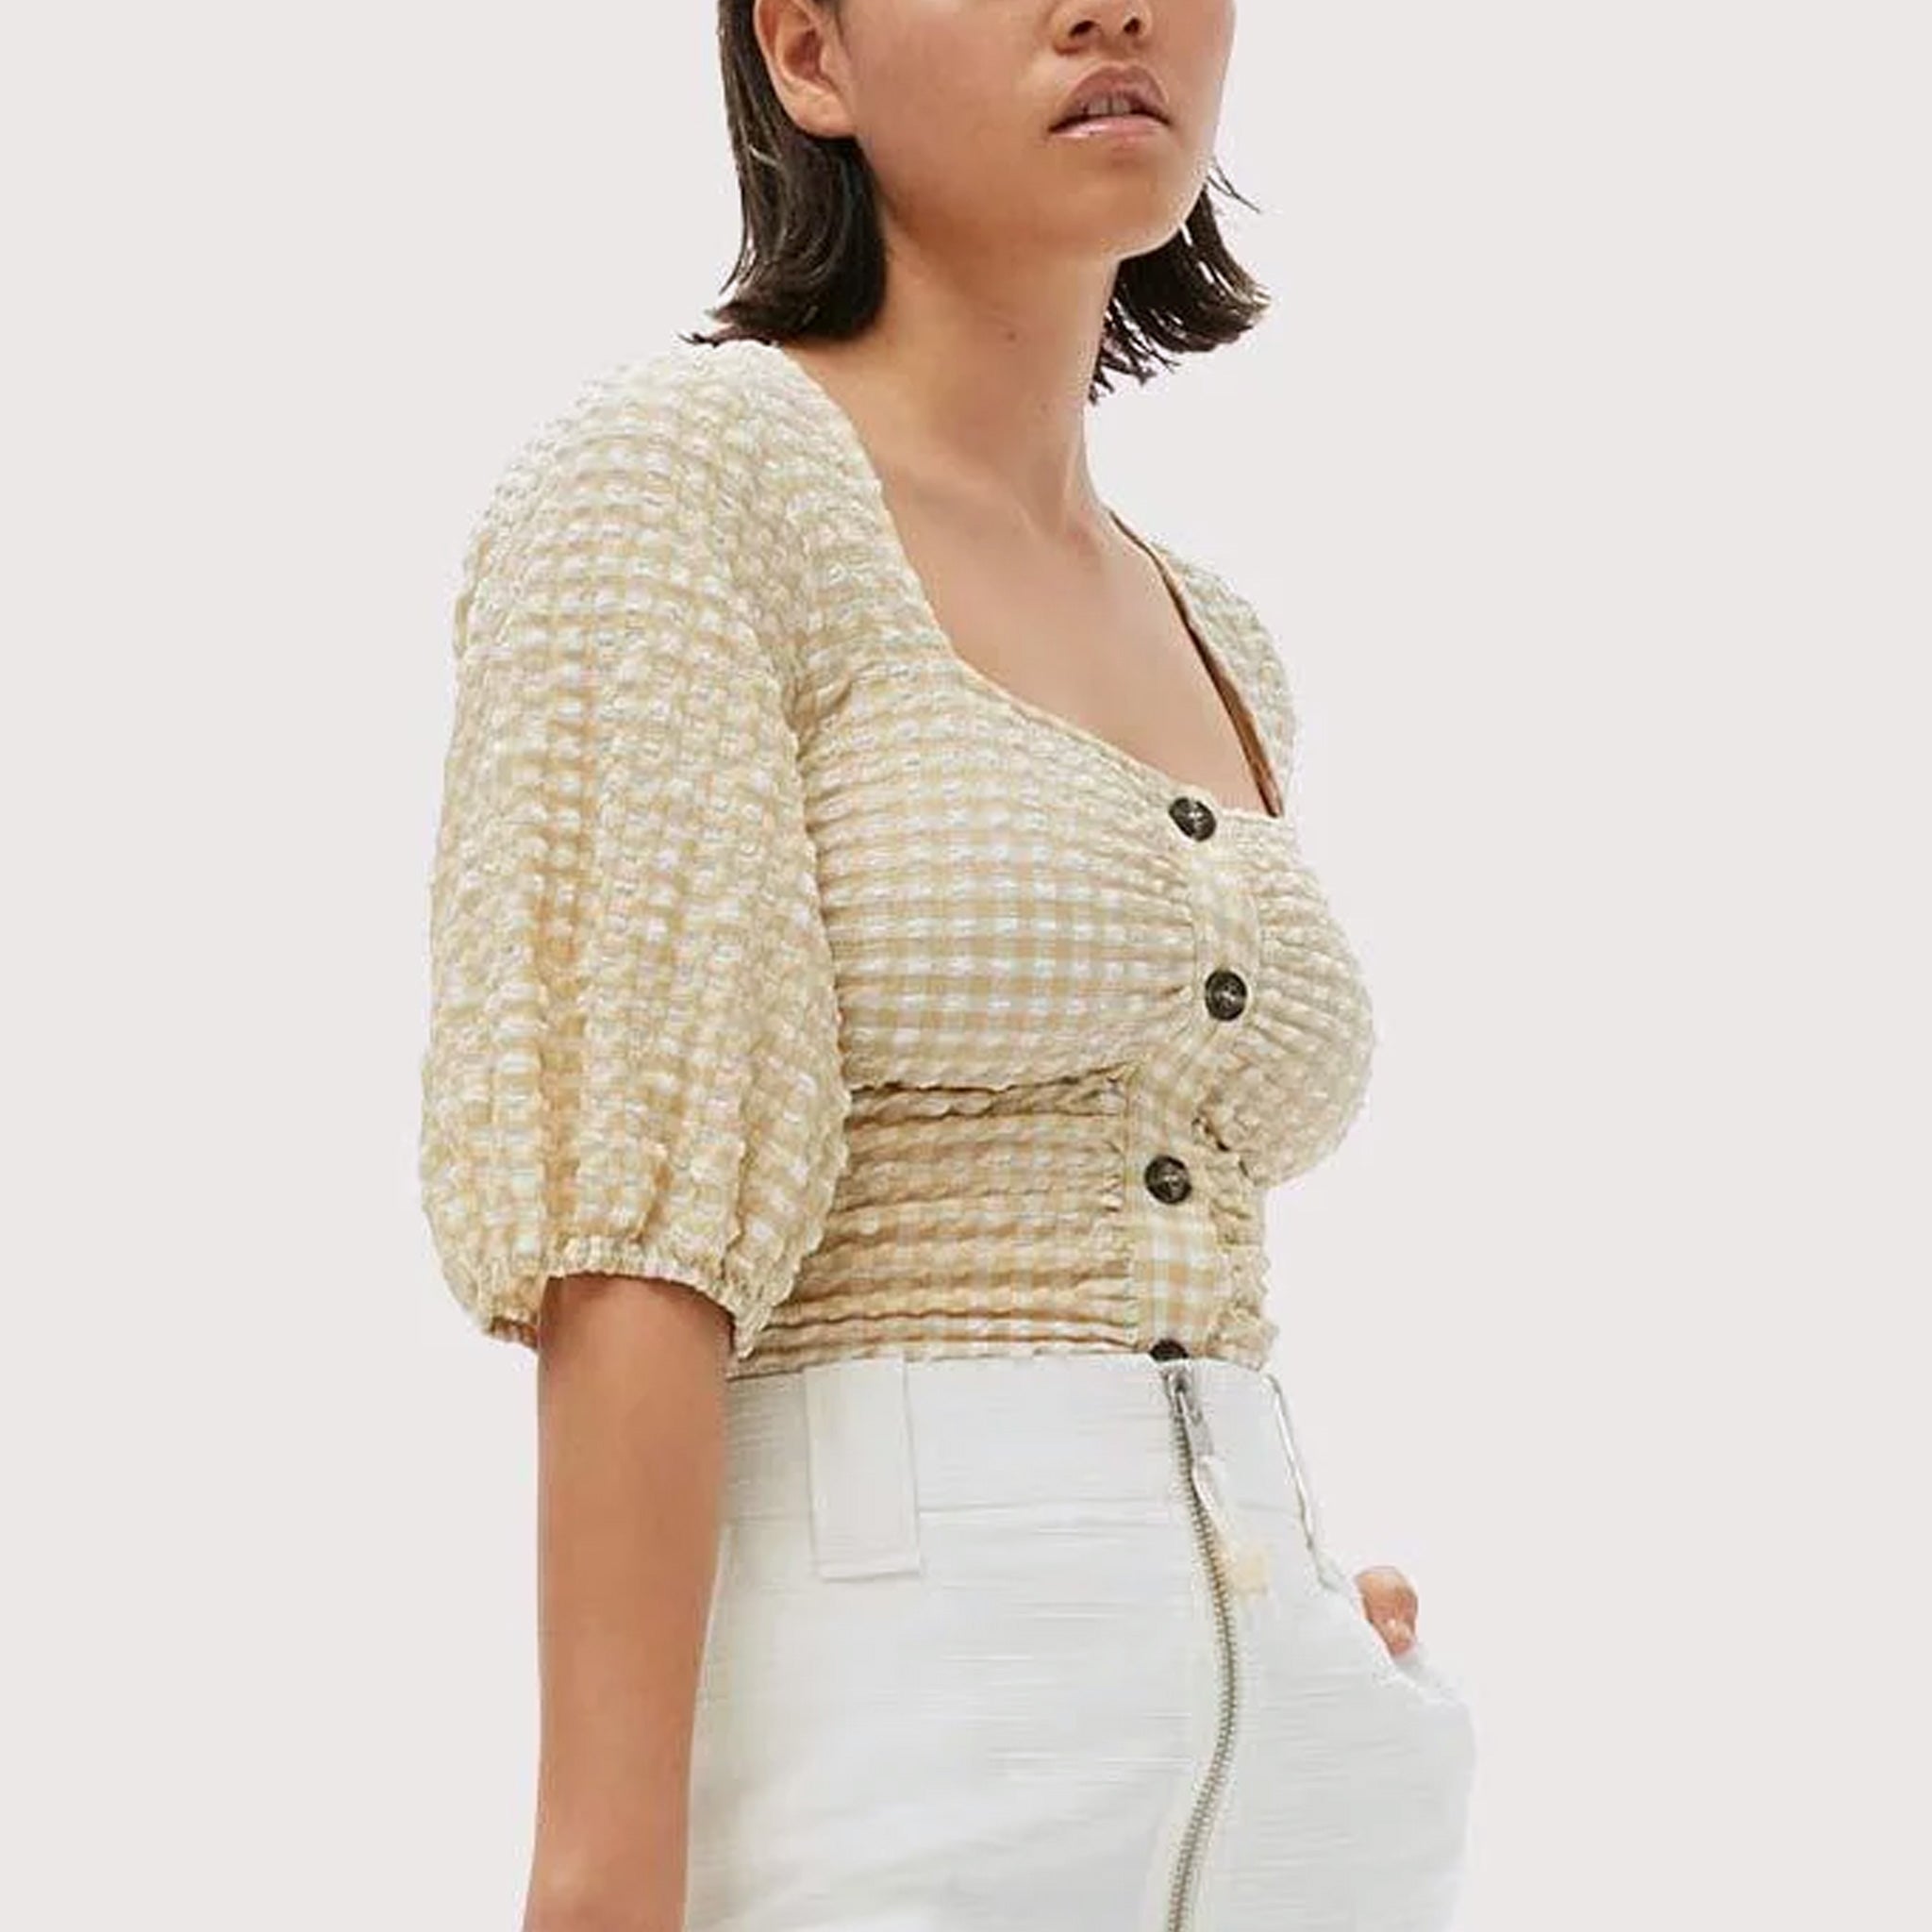 A model wears the beige and white seersucker gathered blouse by Ganni tucked into white bottoms.